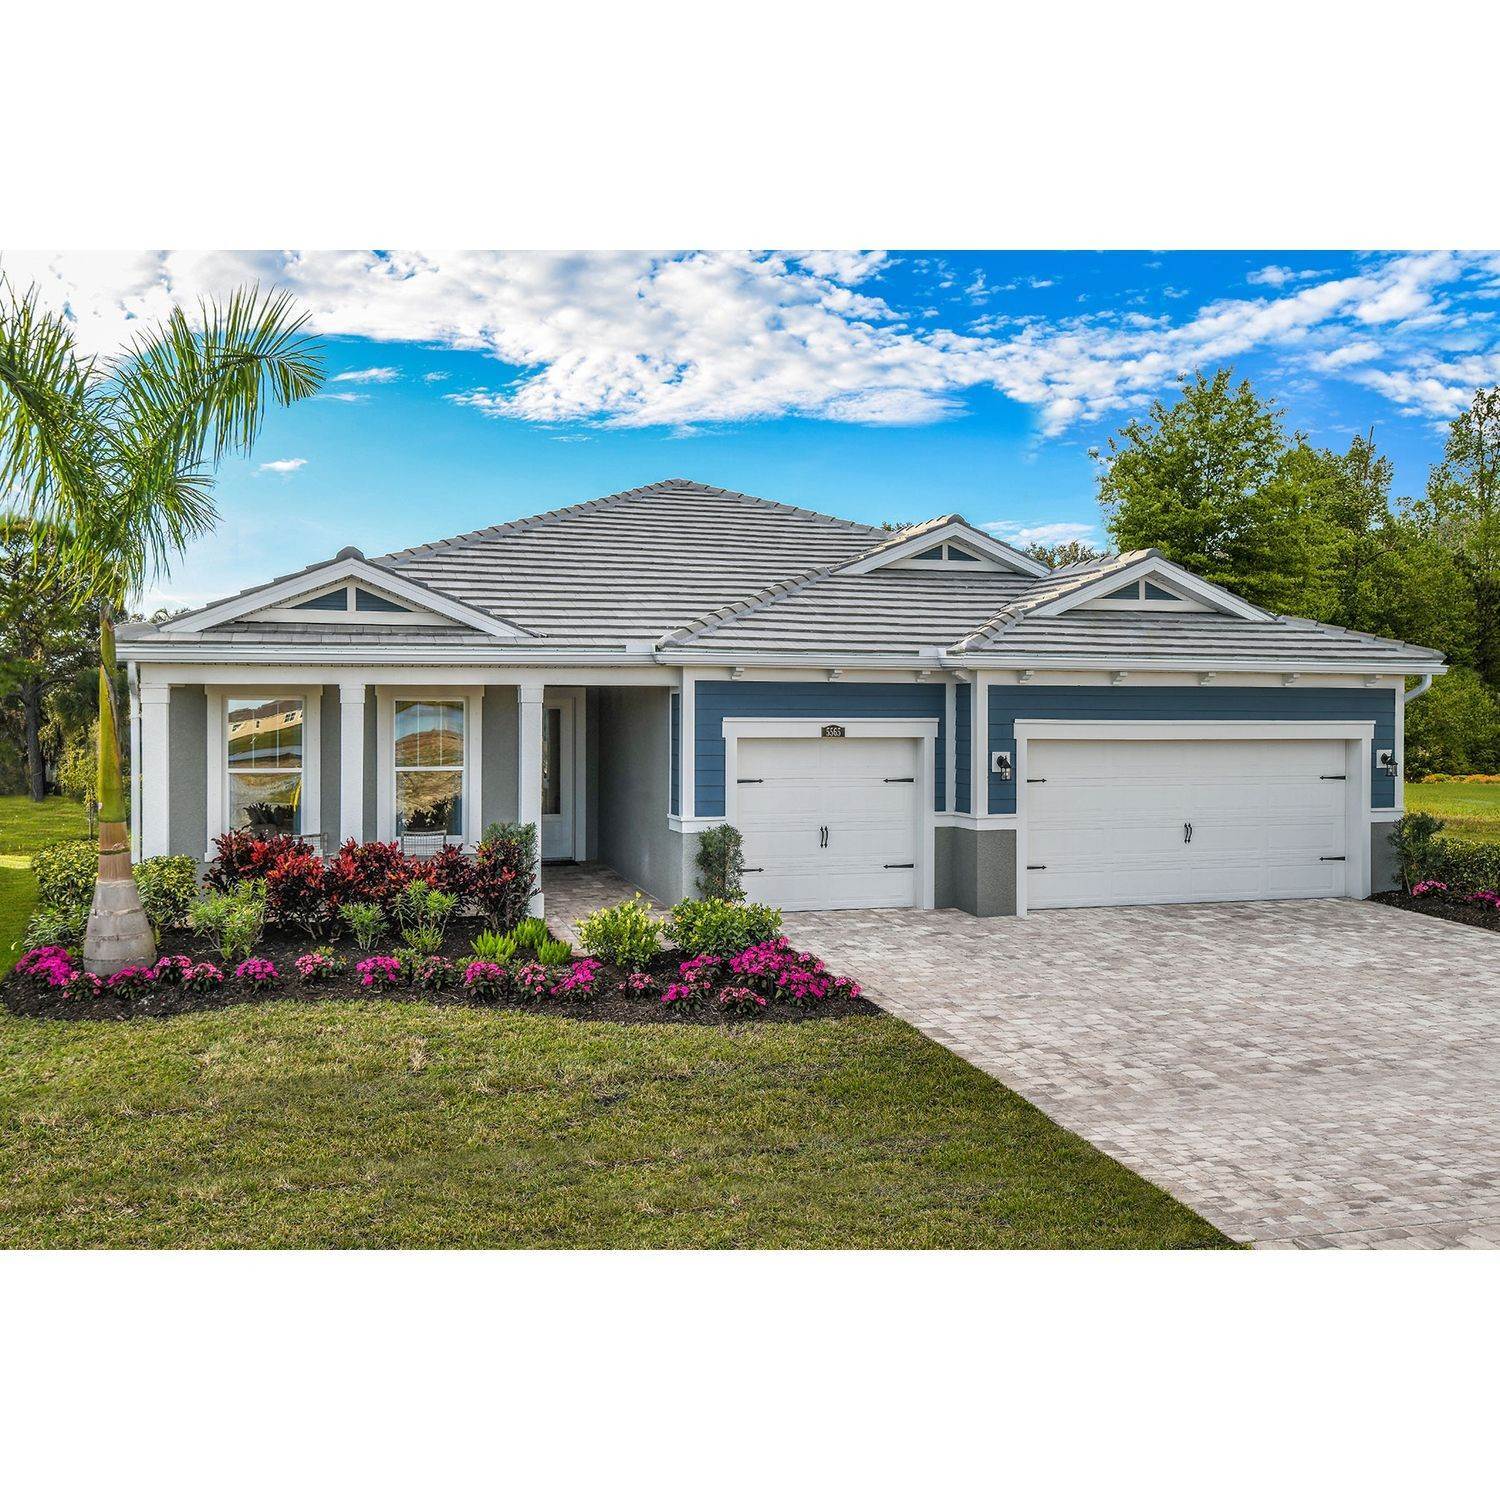 Single Family for Sale at Venice, FL 34293